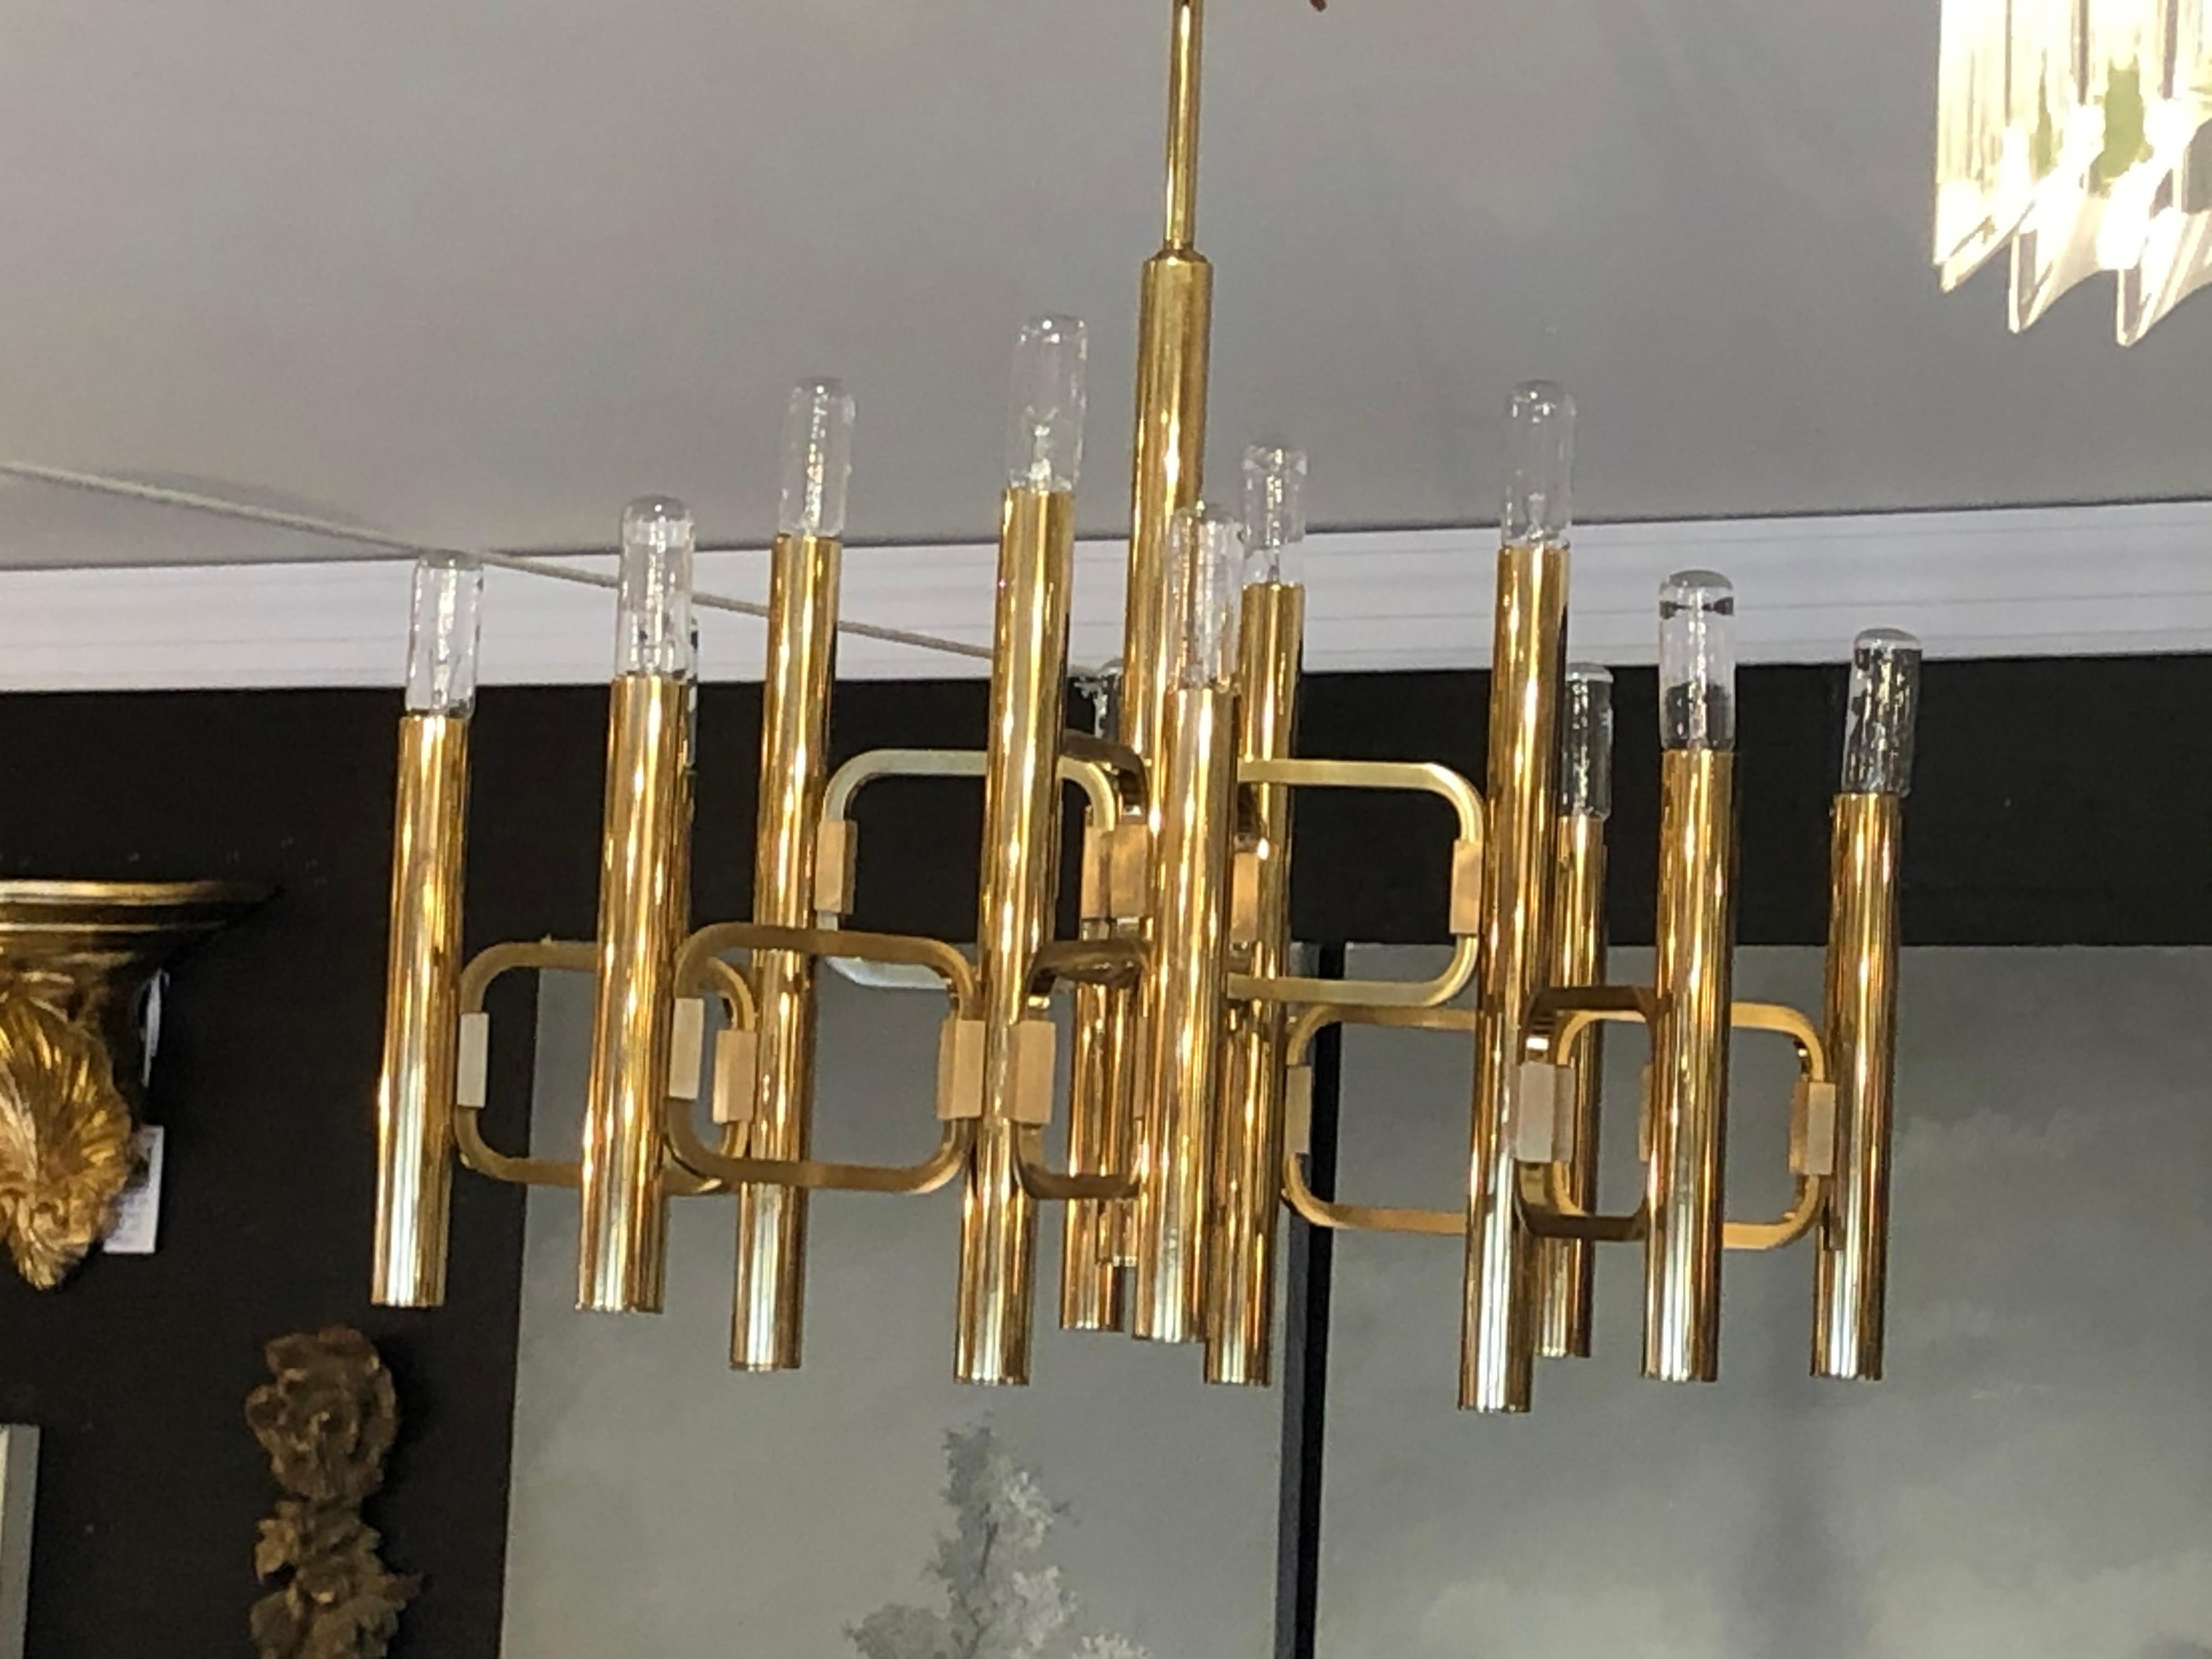 A fabulous very difficult to find mid century modern gold-plated chandelier from the Modulo Collection,  produced by Profili Industria Lampadari Spa. The bulbs are elongated, almost tube formed. When illuminated the entire piece glistens. Made in